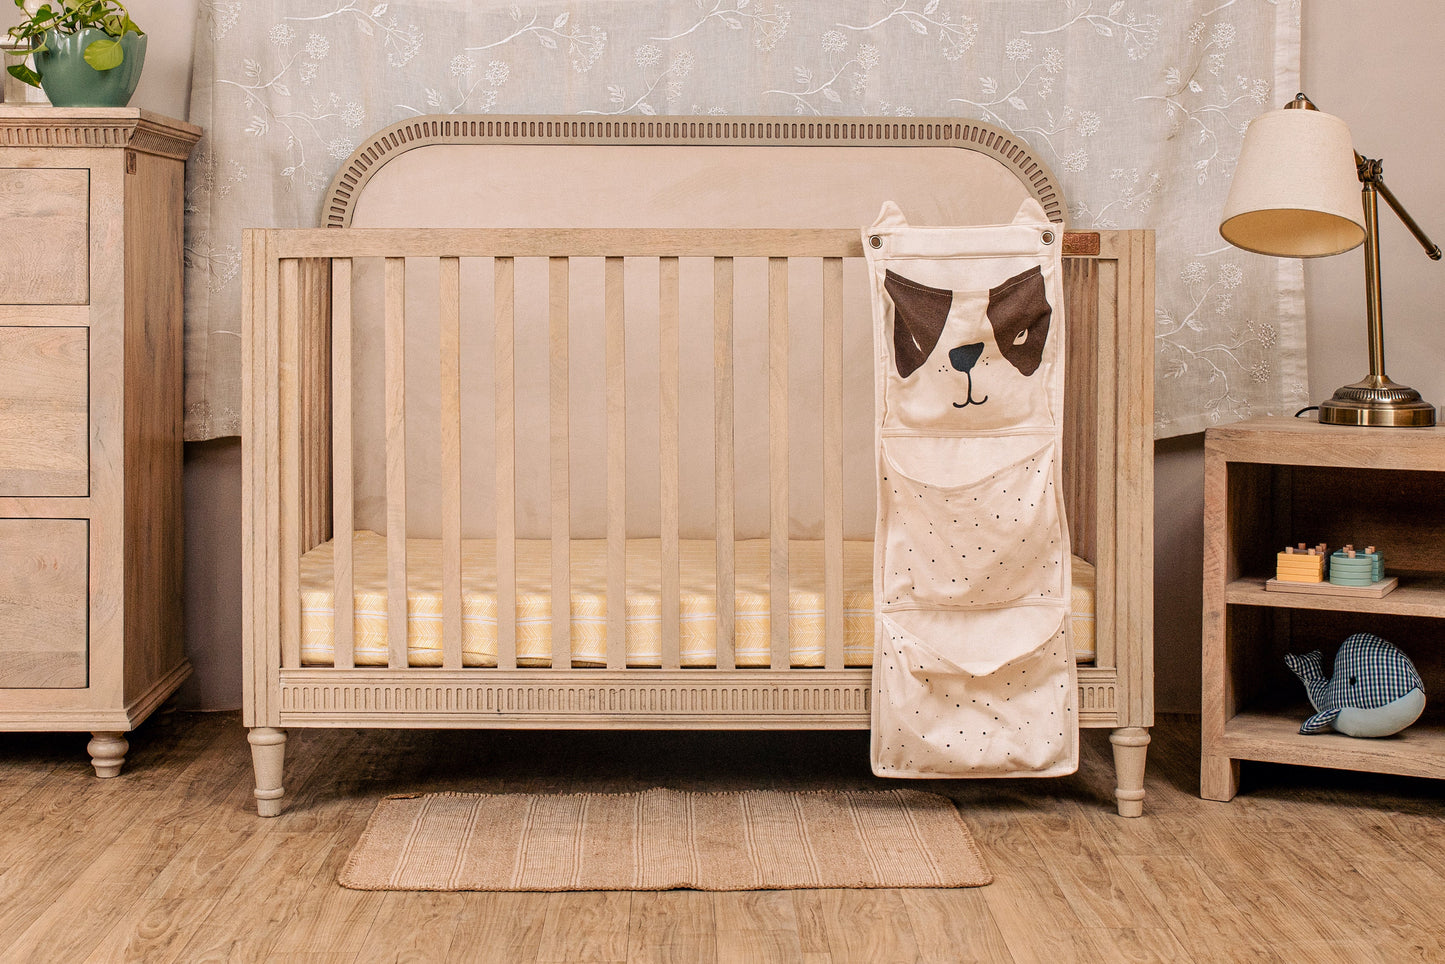 Buy Wooden Baby Cot With Headboard - Oat Finish Online - SkilloToys.com